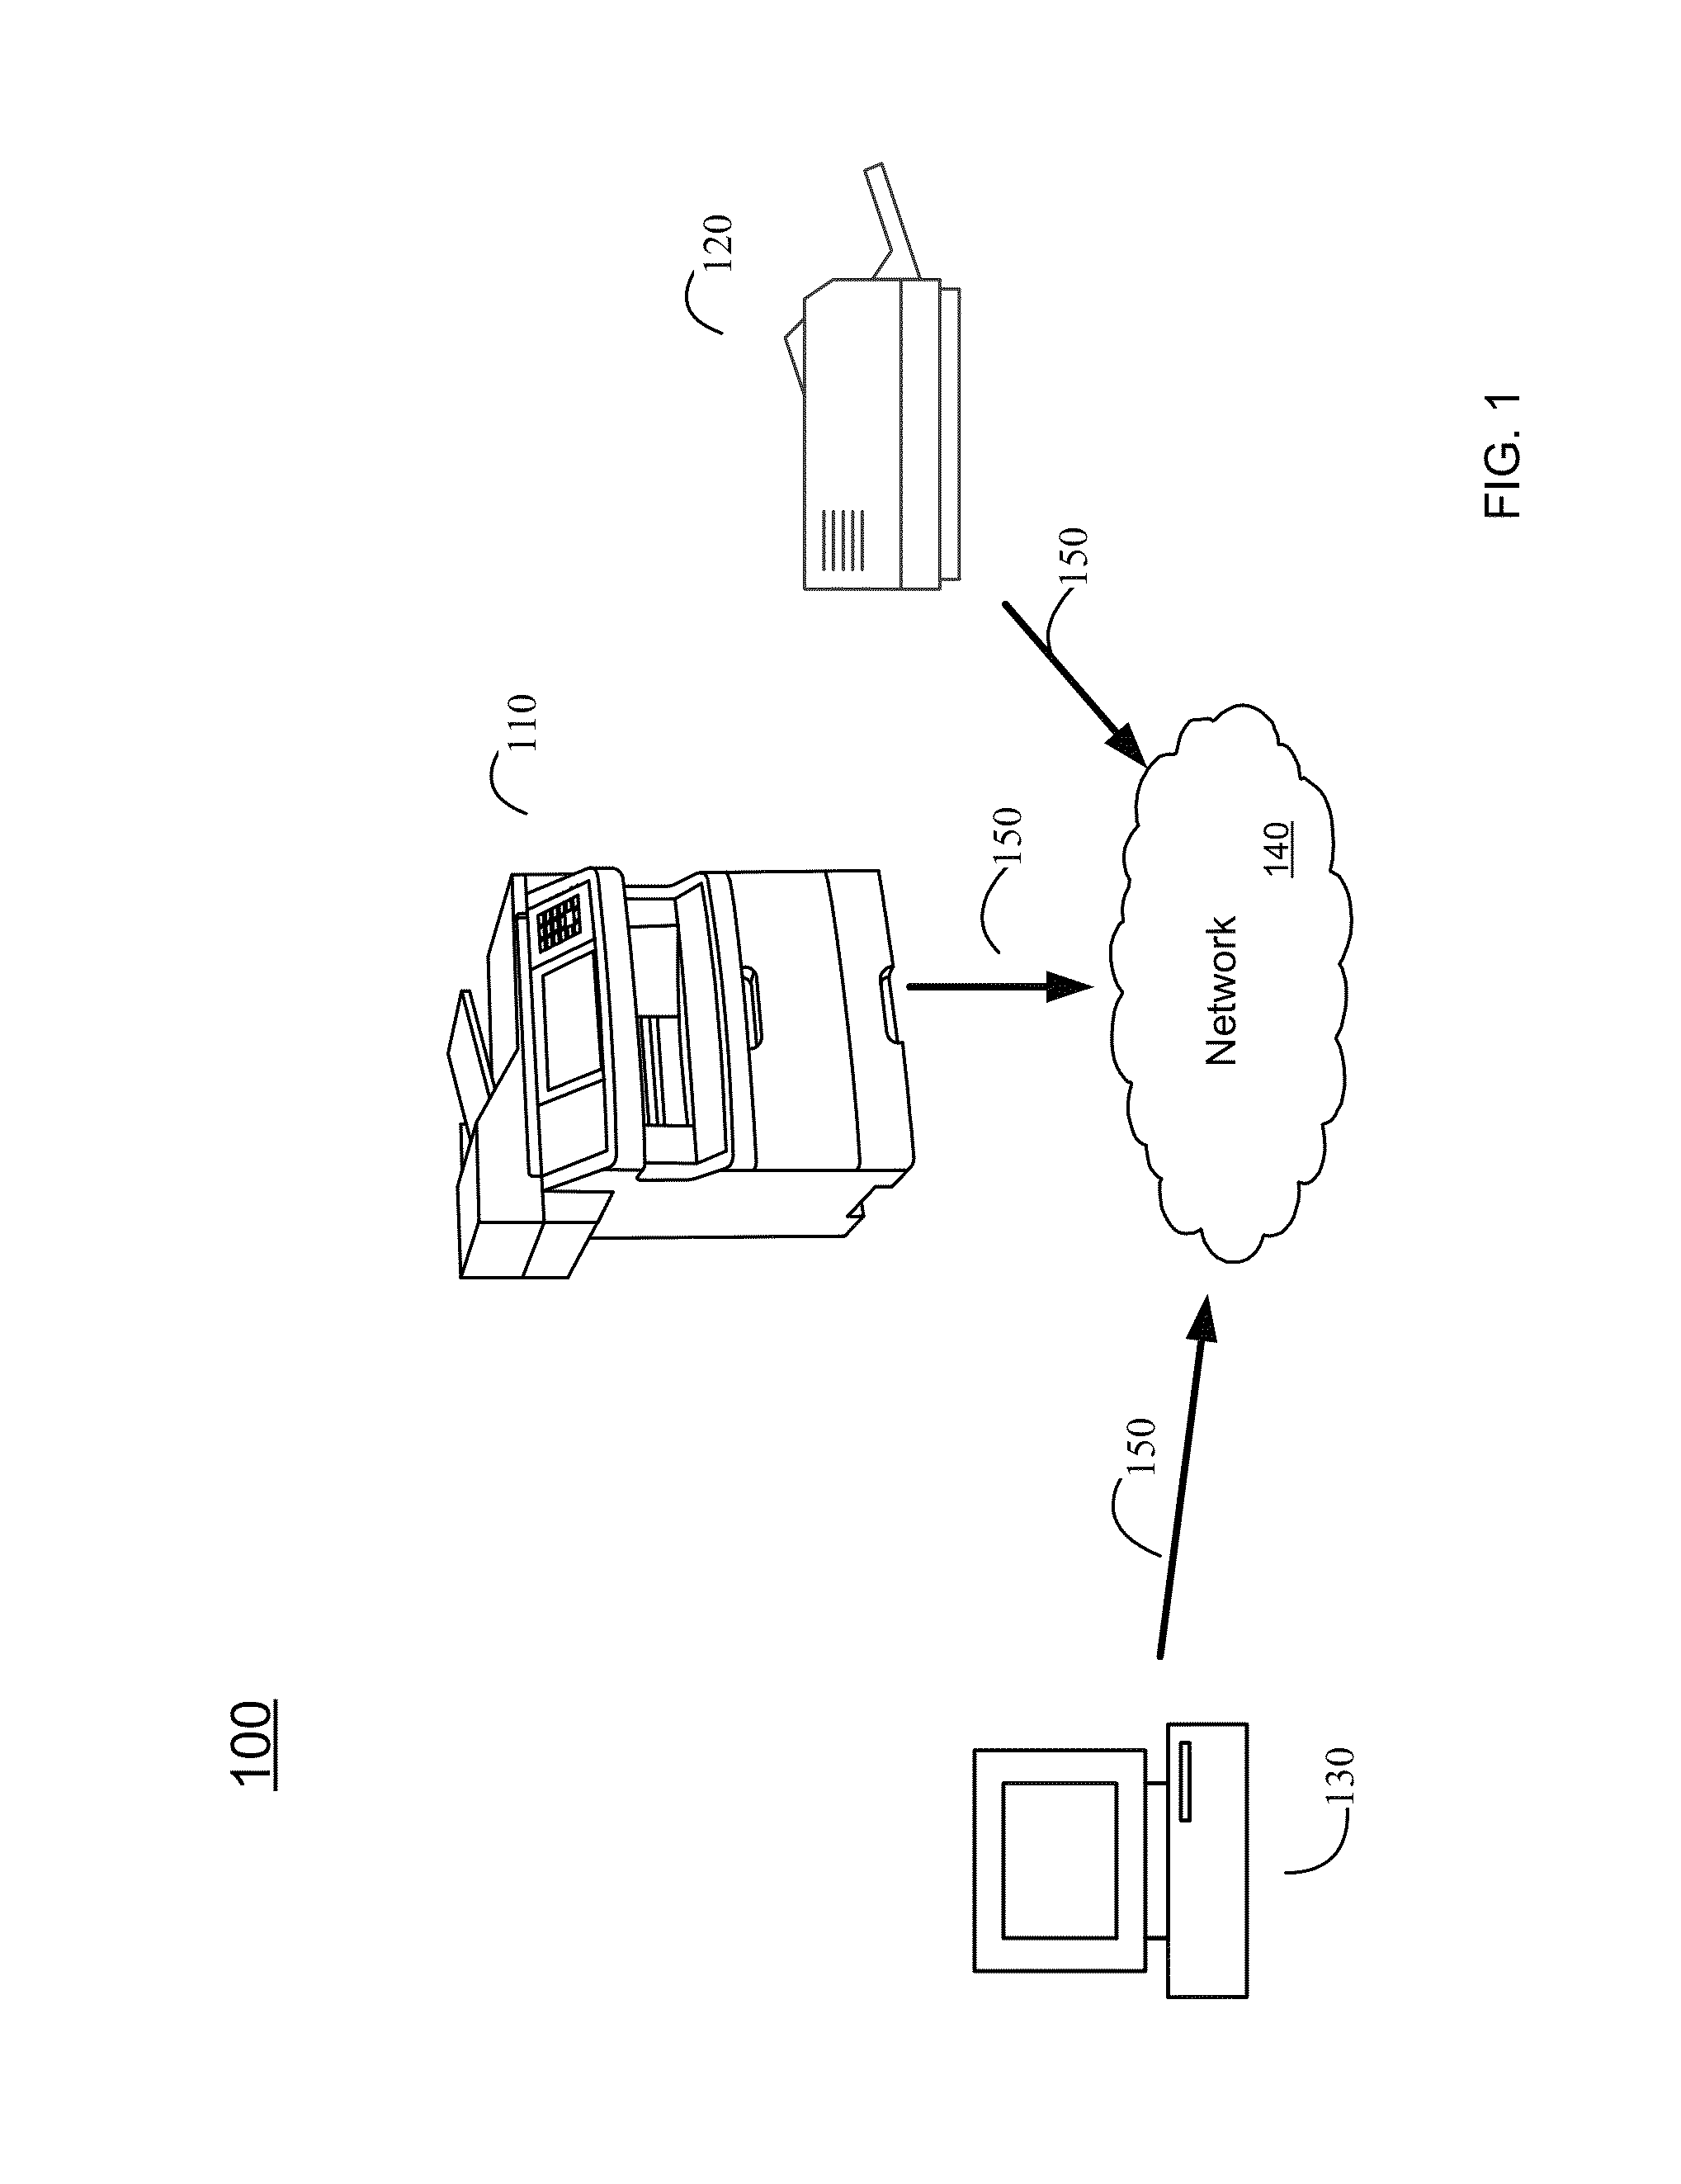 Imaging system with reduced function mode, and methods therefor